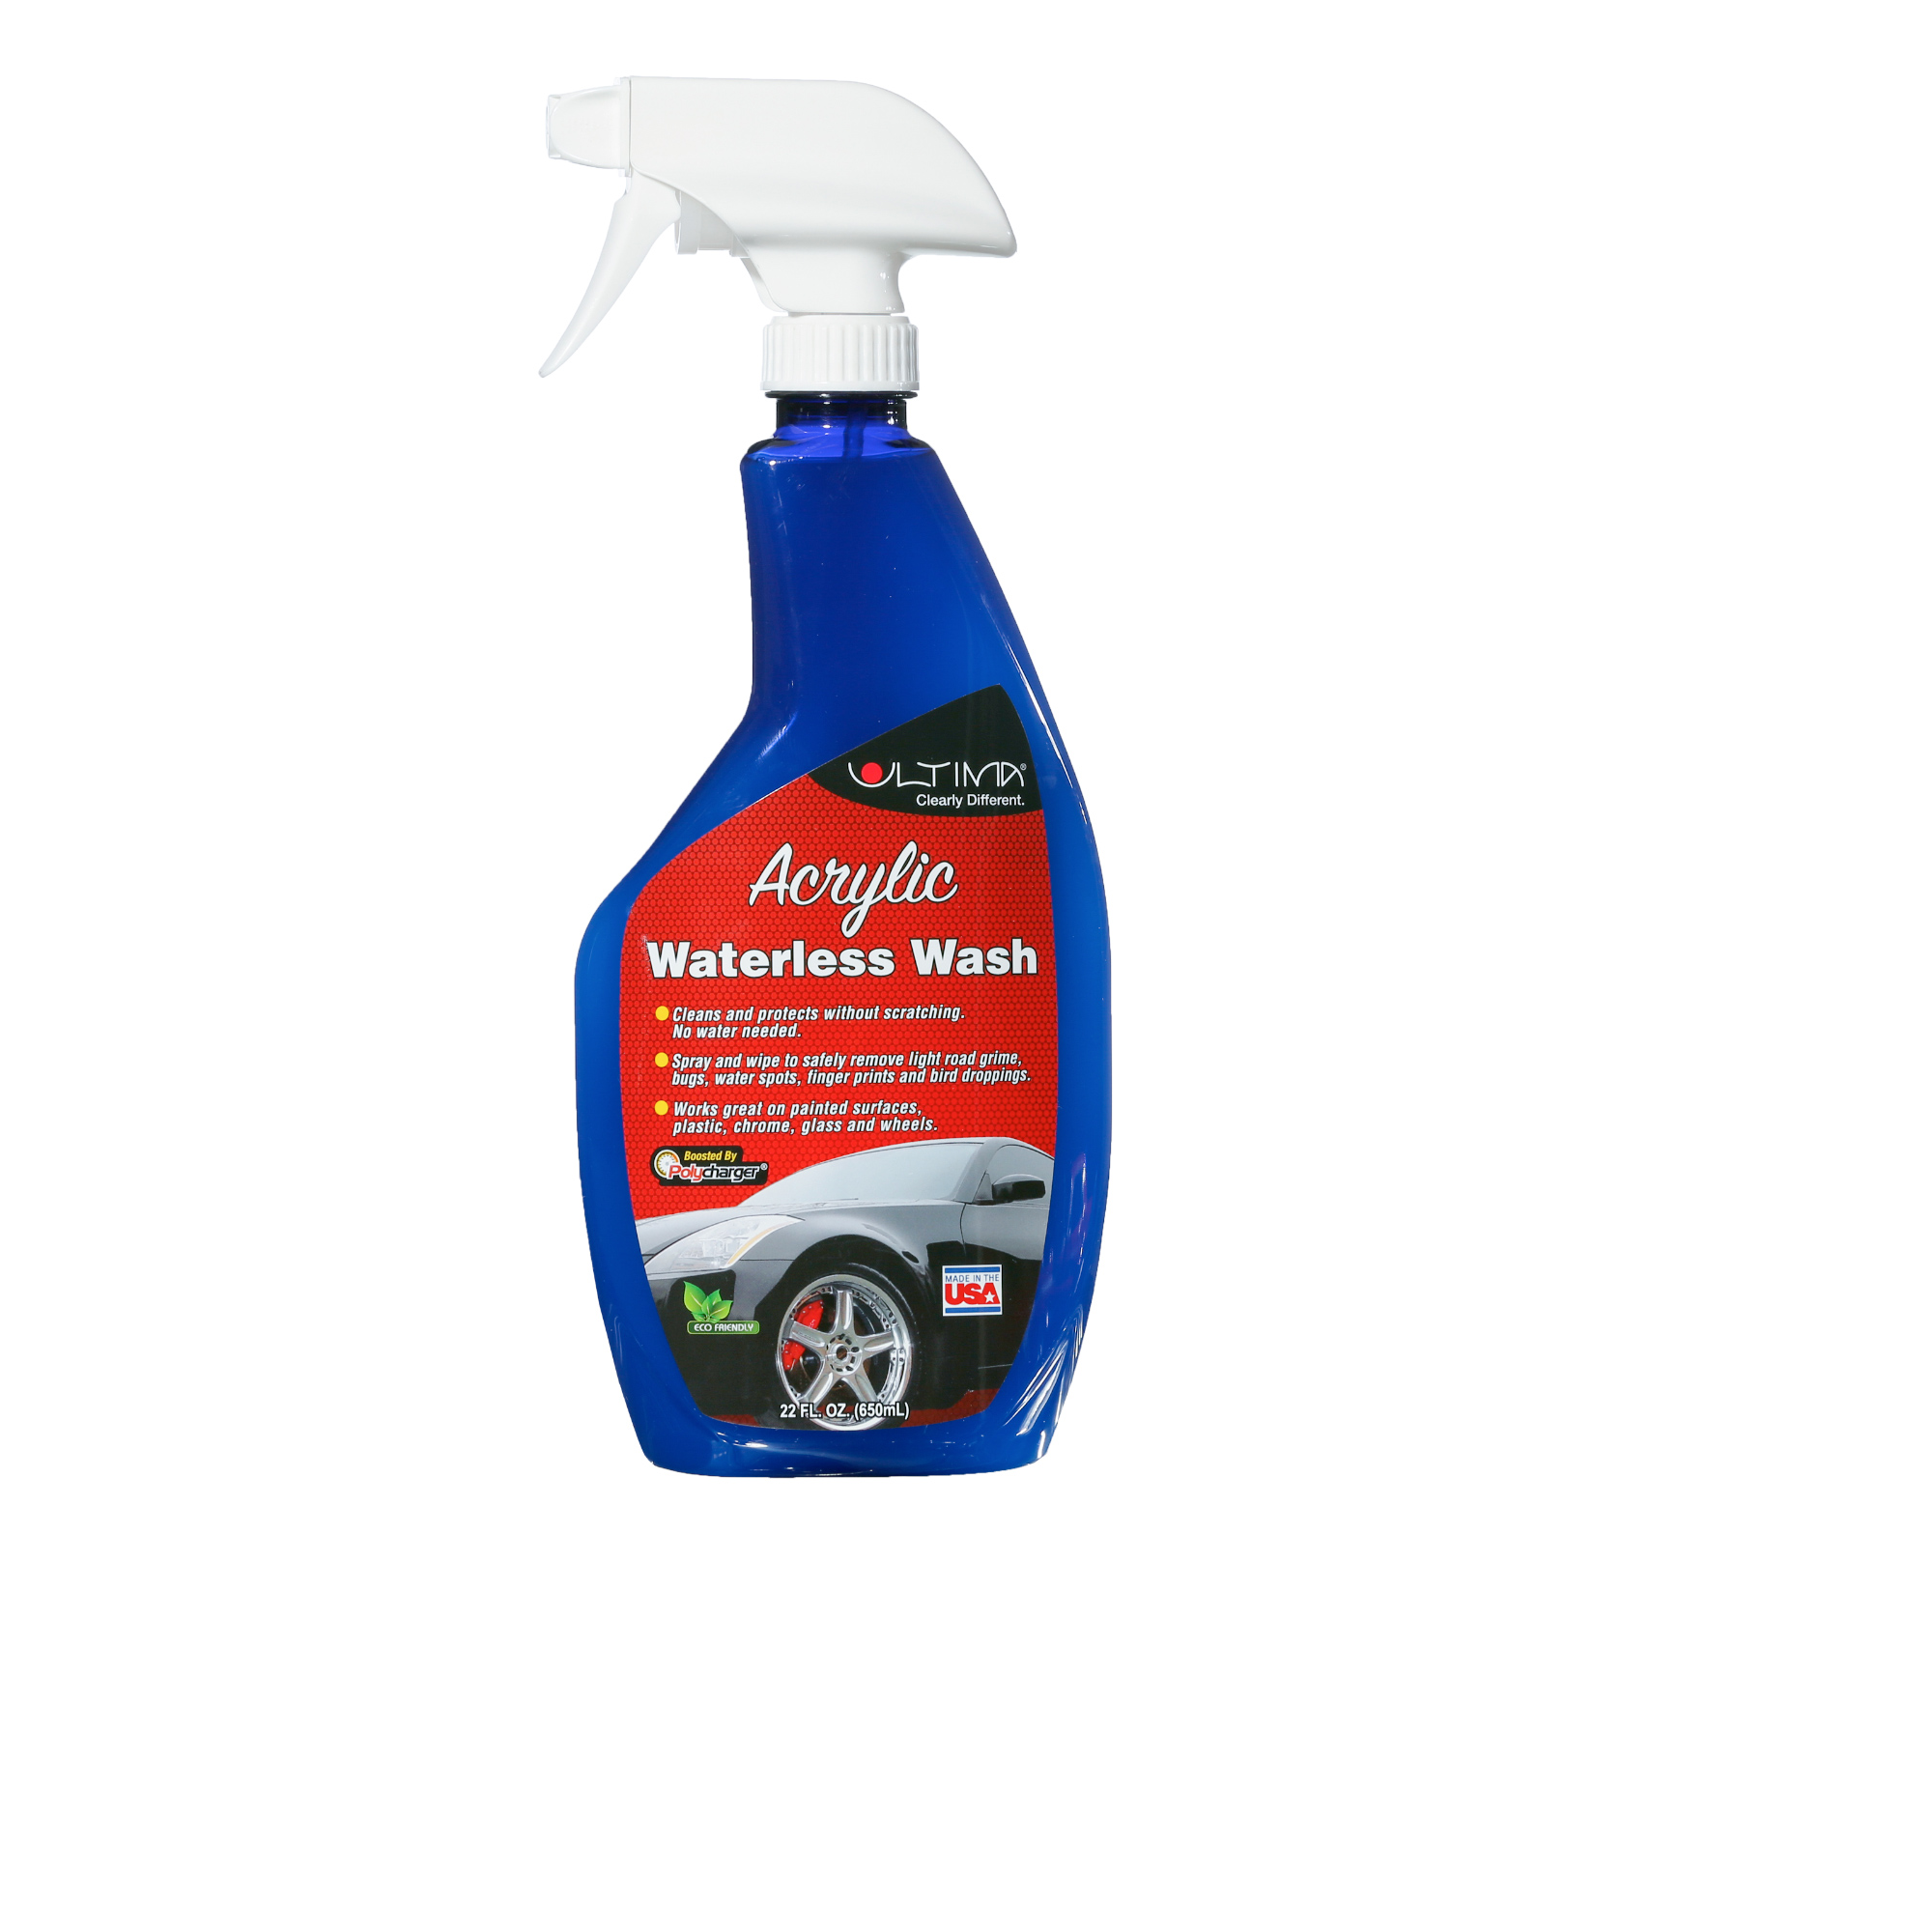 Ultima Acrylic Waterless Wash 22 oz. Bottle For Auto Truck Car RV - image 1 of 6